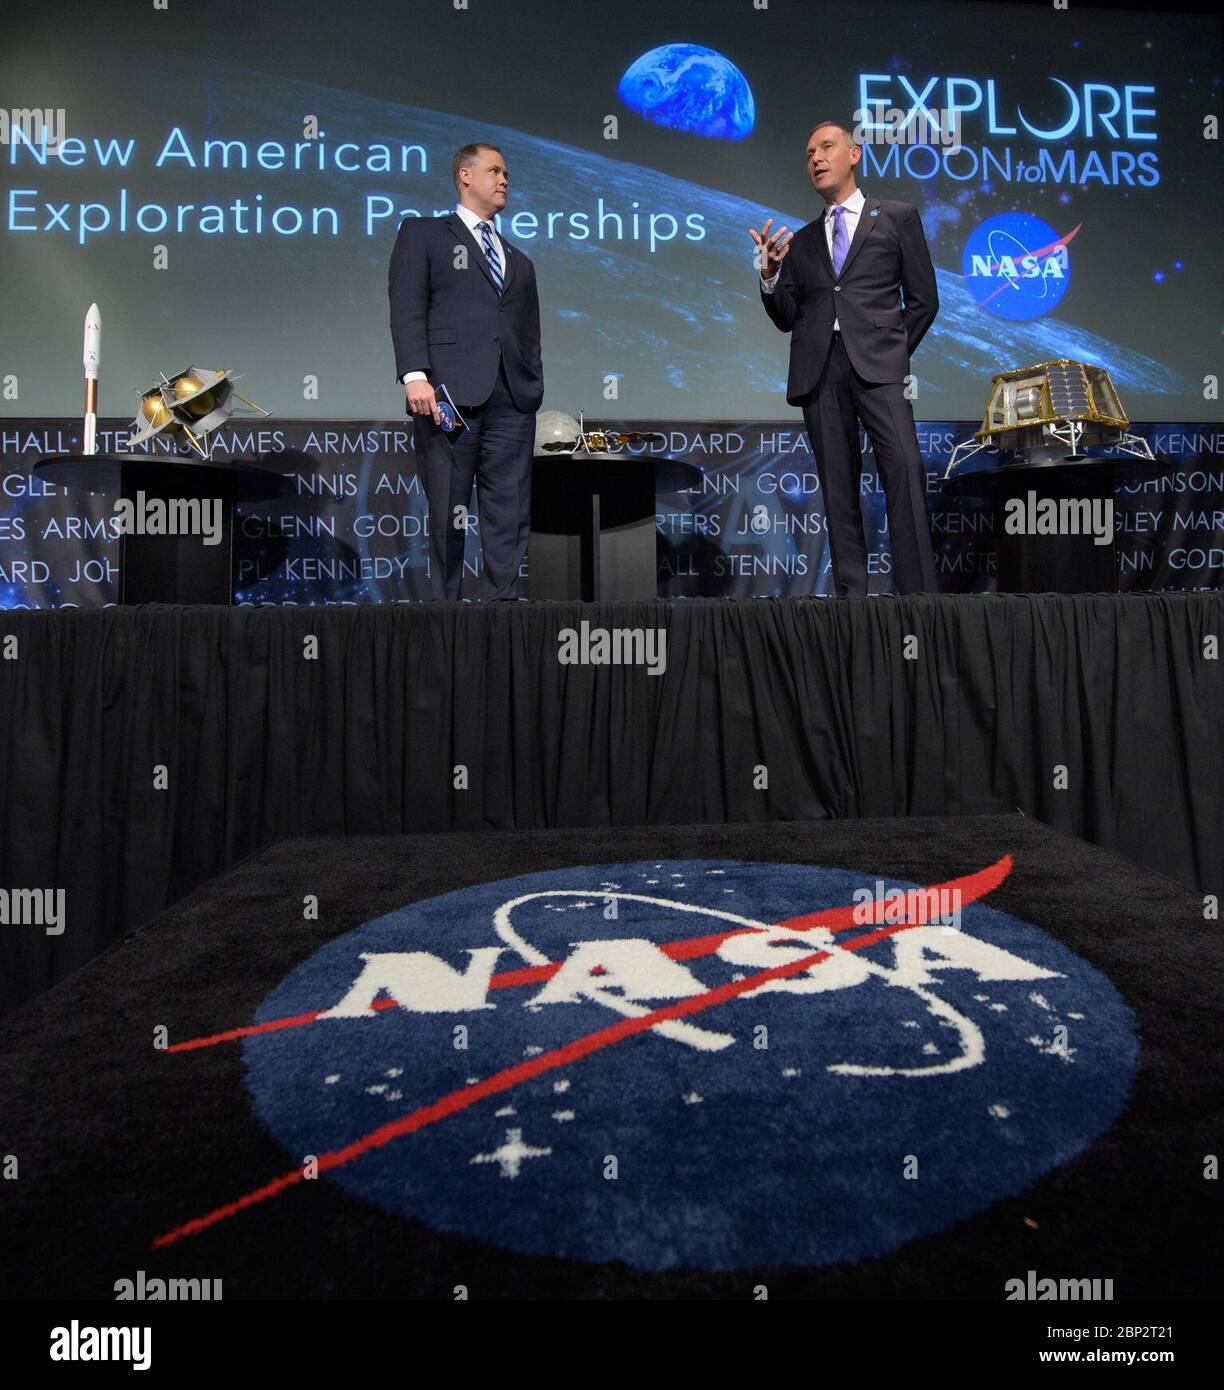 Commercial Lunar Payload Services (CLPS)  NASA Administrator Jim Bridenstine, left, and NASA Associate Administrator for the Science Mission Directorate, Thomas Zurbuchen, answer questions during an event where nine U.S. companies where named as eligible to bid on NASA delivery services to the lunar surface through Commercial Lunar Payload Services (CLPS) contracts, Thursday, Nov. 29, 2018 at NASA Headquarters in Washington. The companies will be able to bid on delivering science and technology payloads for NASA, including payload integration and operations, launching from Earth and landing on Stock Photo